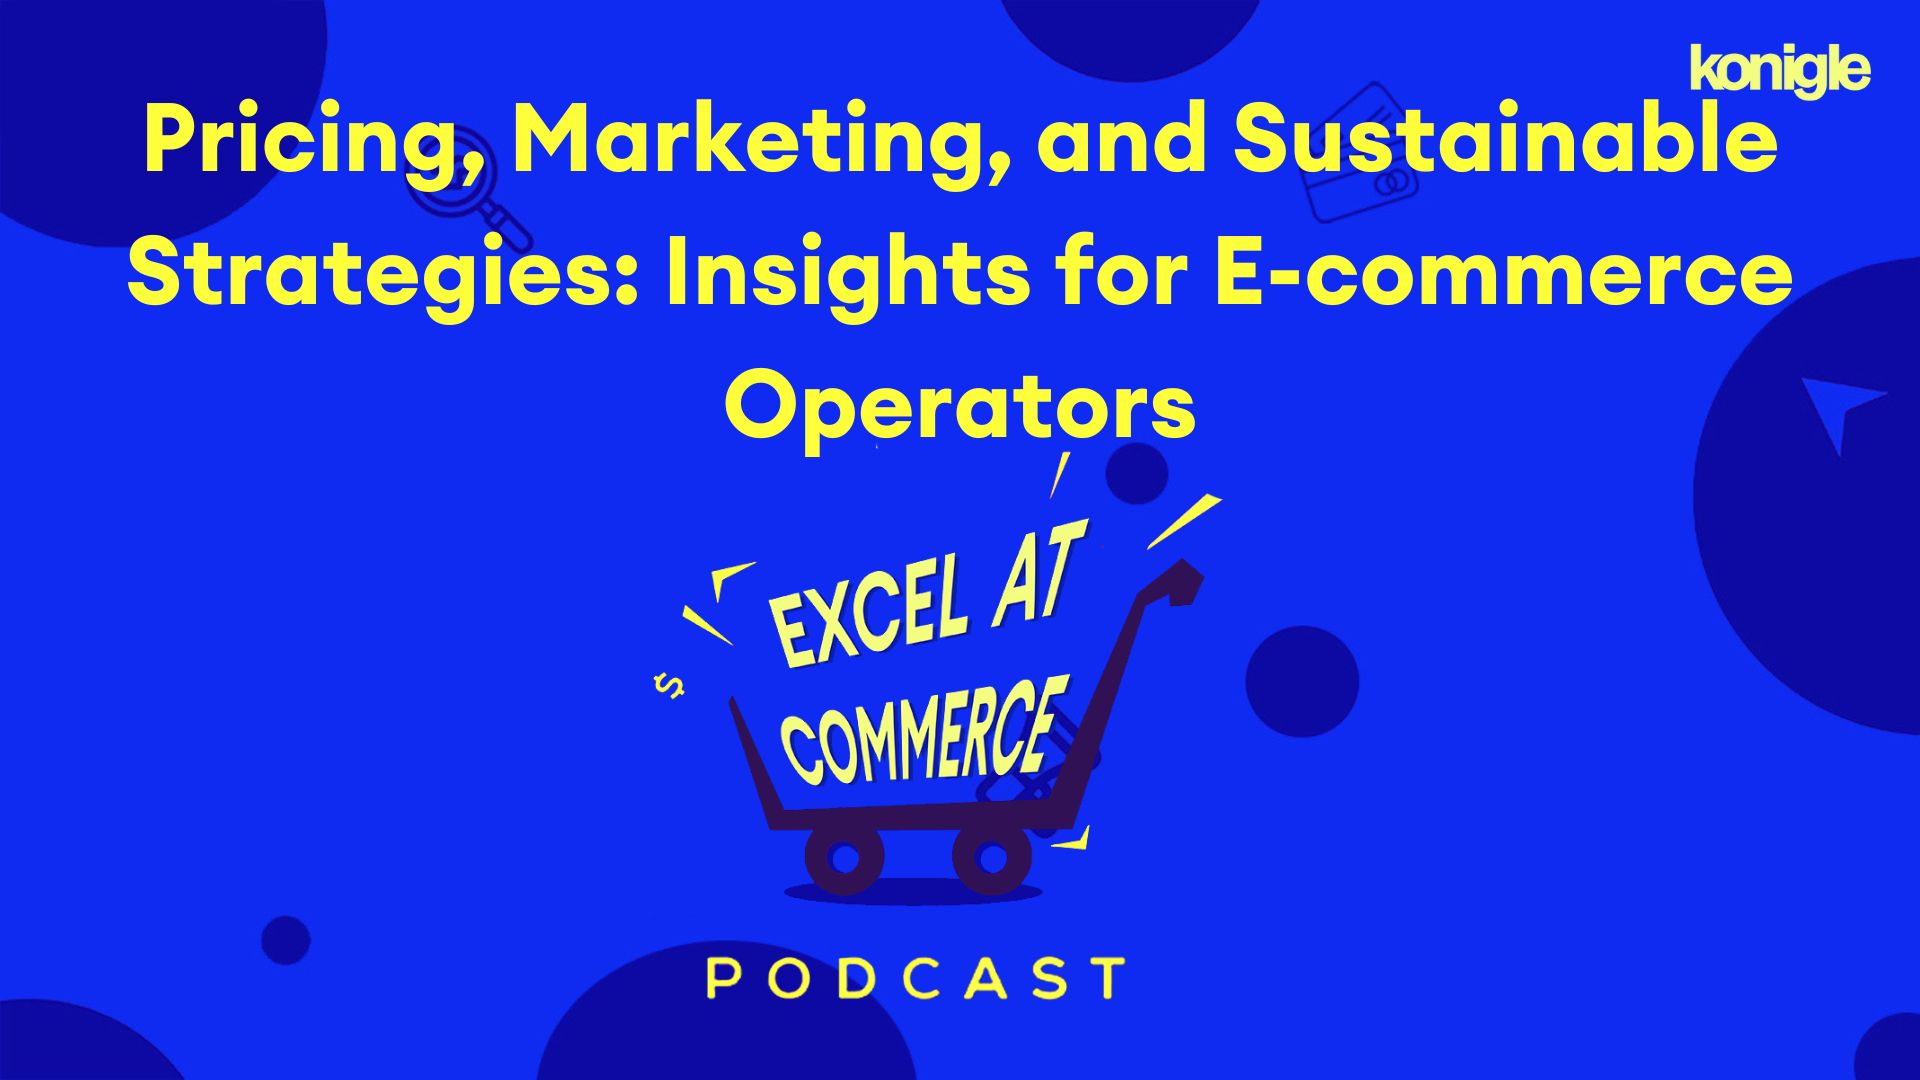 Pricing, Marketing, and Sustainable Strategies: Insights for E-commerce Operators